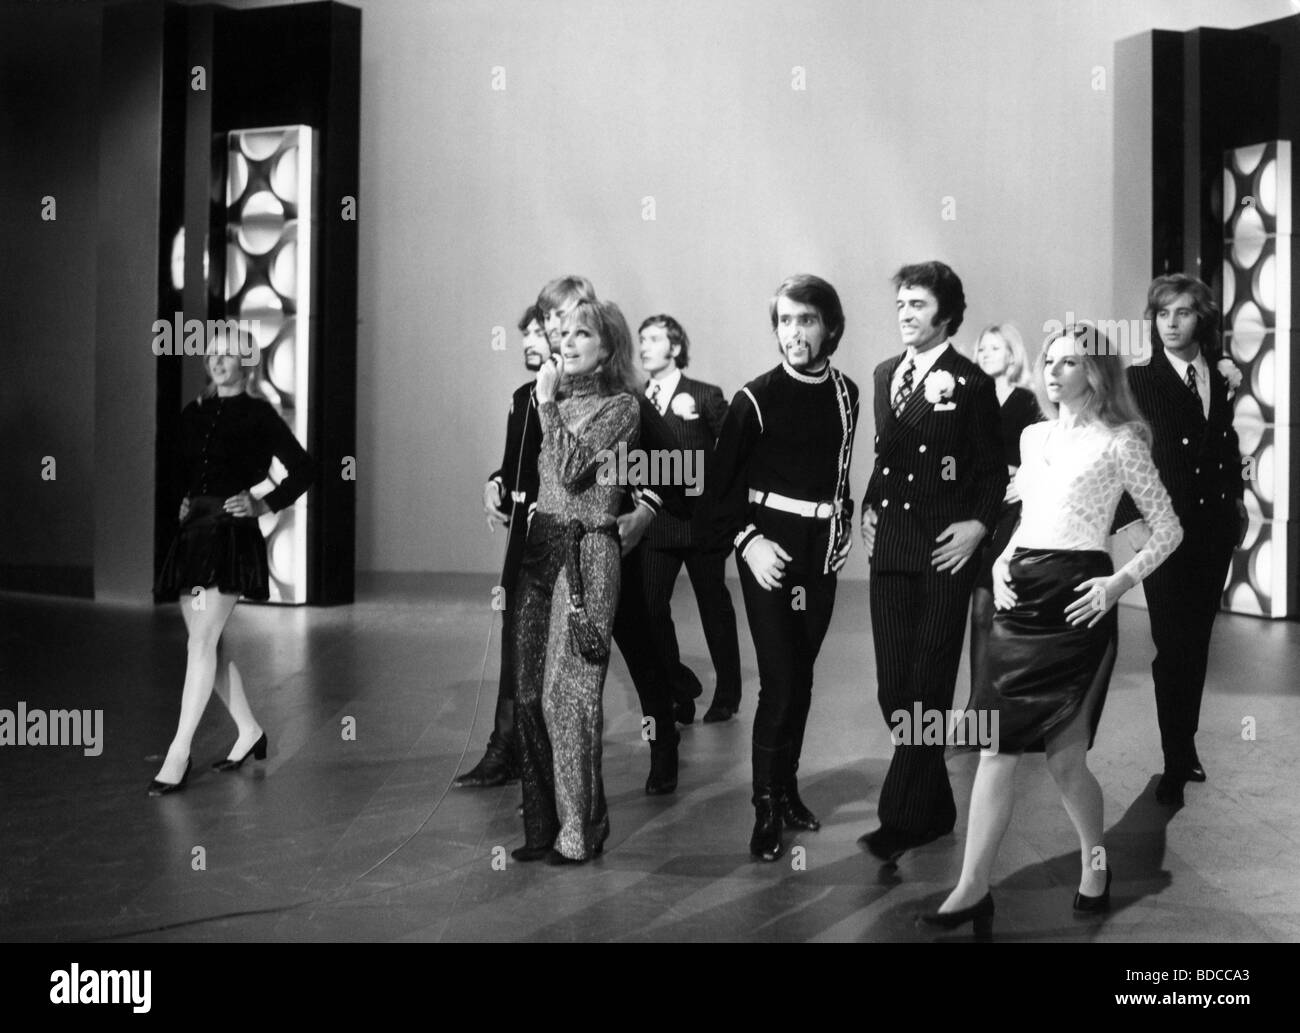 Knef, Hildegard, 28.12.1925 - 1.2.2002, German actress, full  length, with William Milié Ballett, during music act in telecast 'Hildegard Knef ', 19.4.1973, Stock Photo